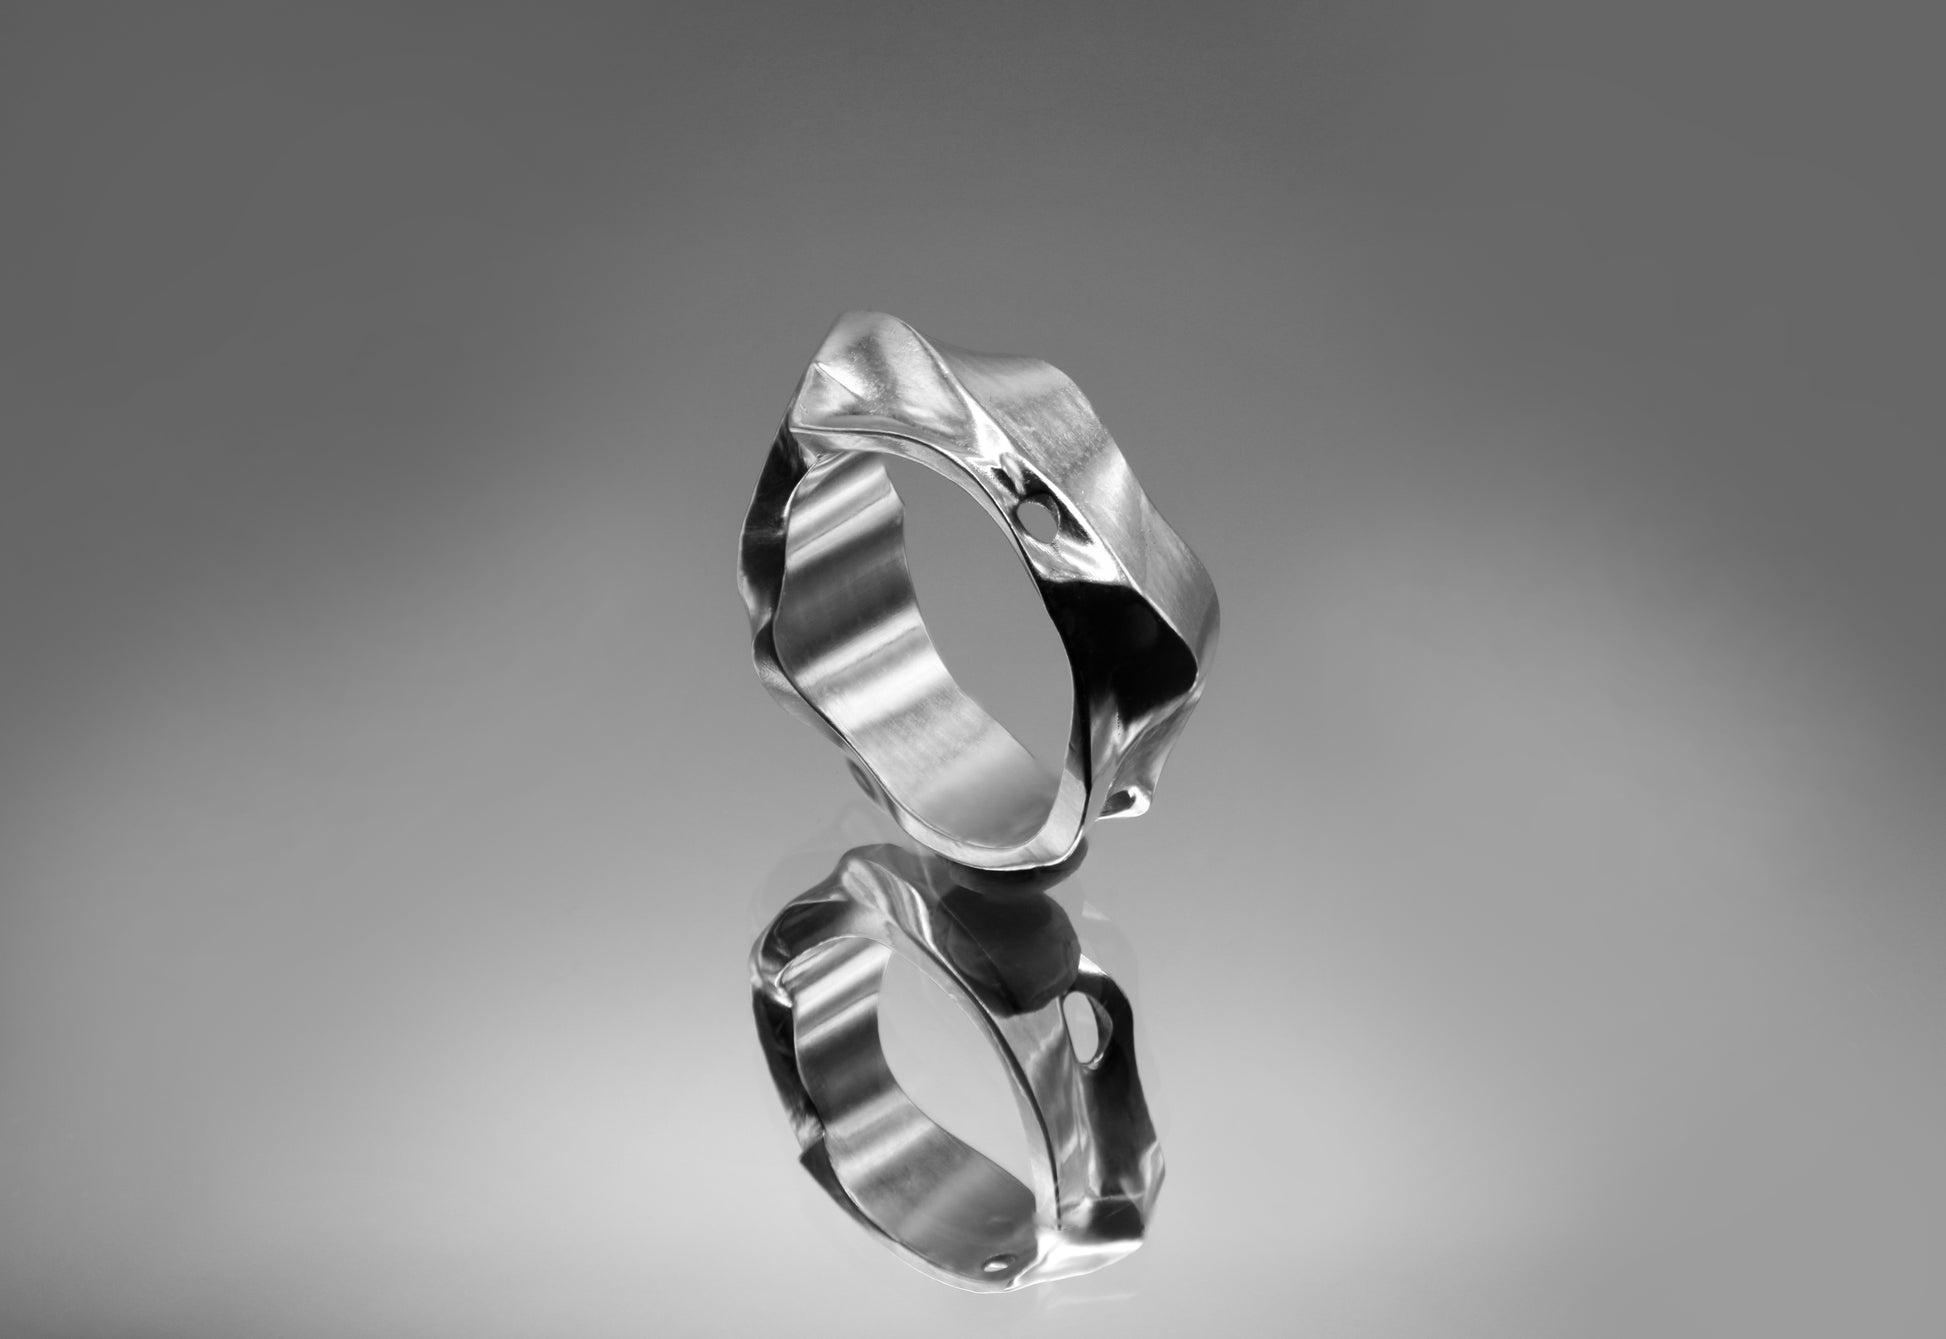 Entangled silver wire ring in a grunge optic